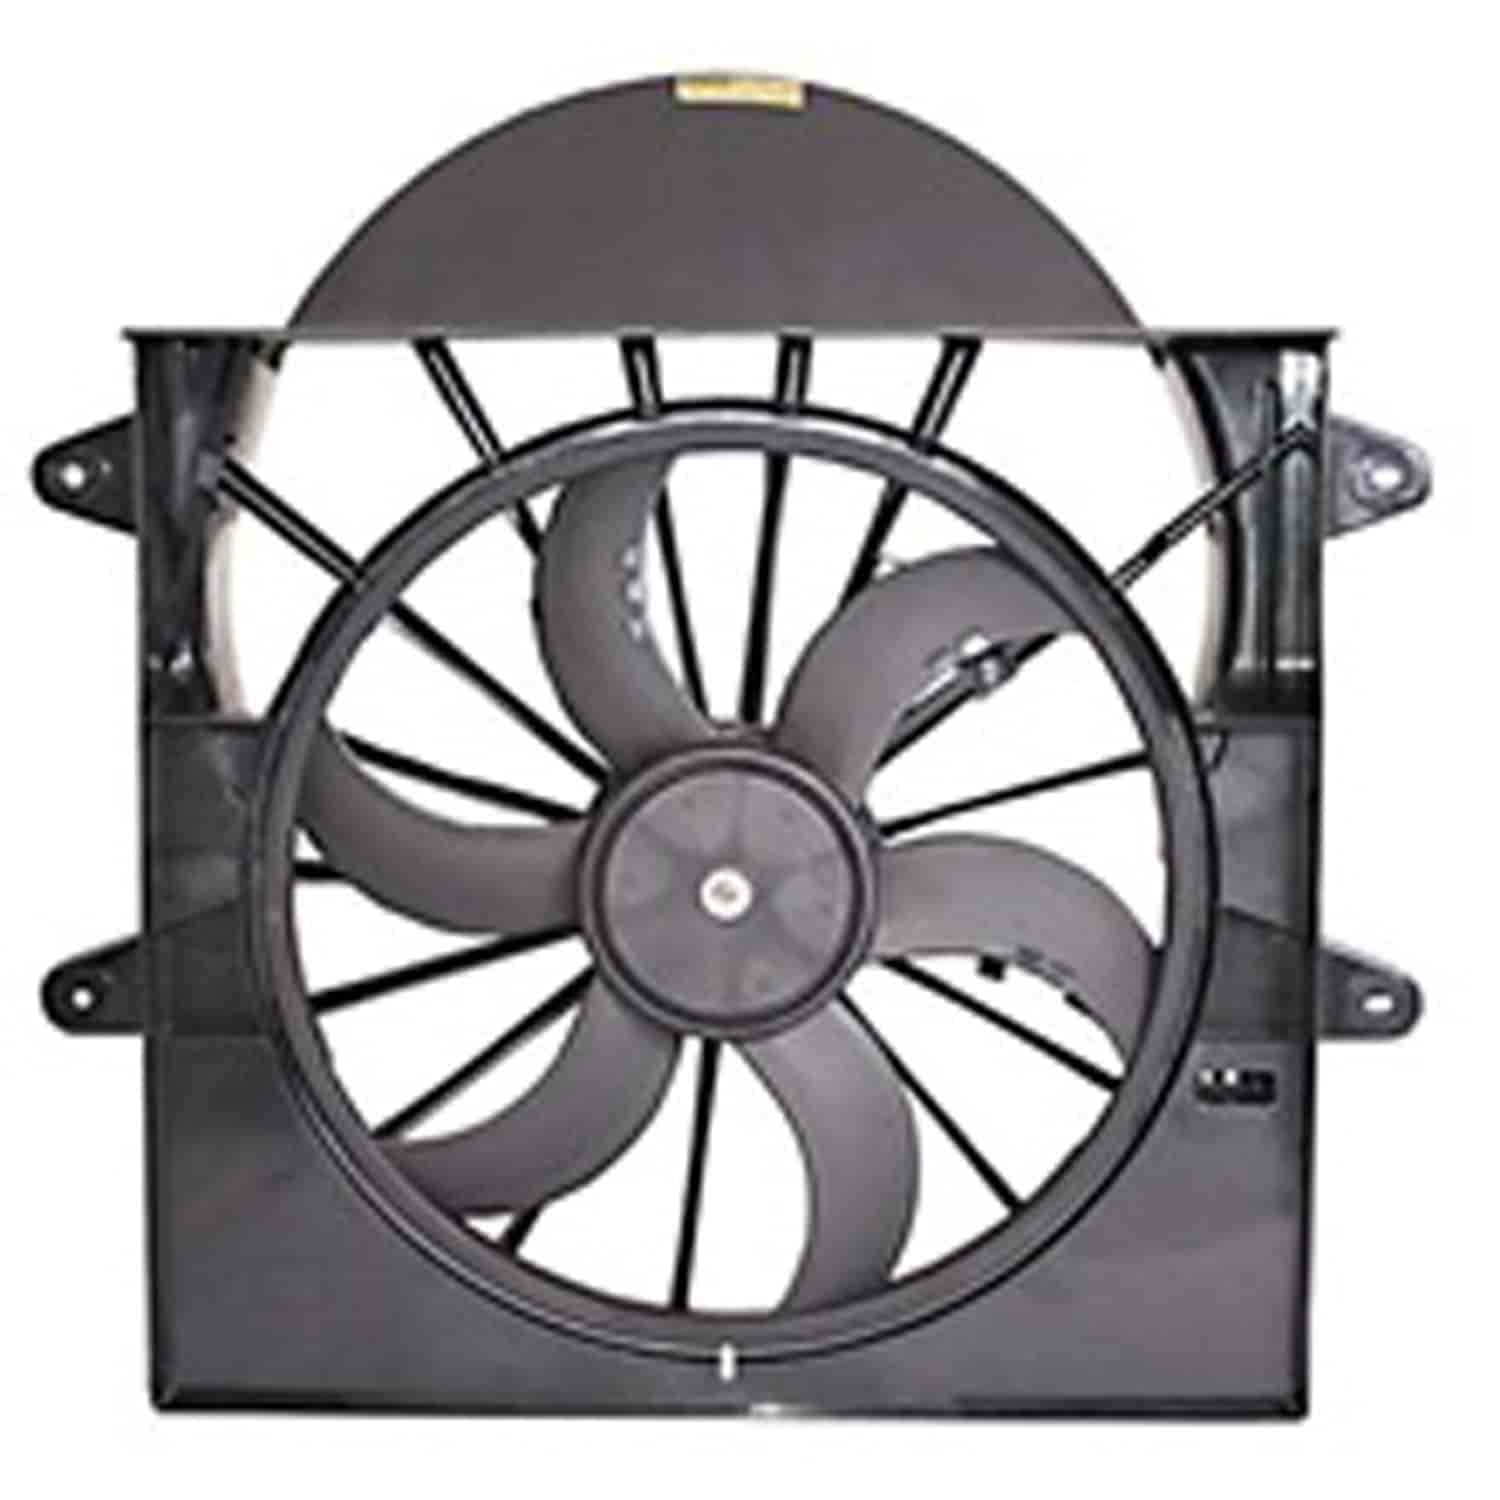 Fan Assembly 2005-2010 Grand Cherokee 3.7L and 5.7 2005-2009 Grand Cherokee 4.7L 2006-2010 Grand Cherokee 6.1L